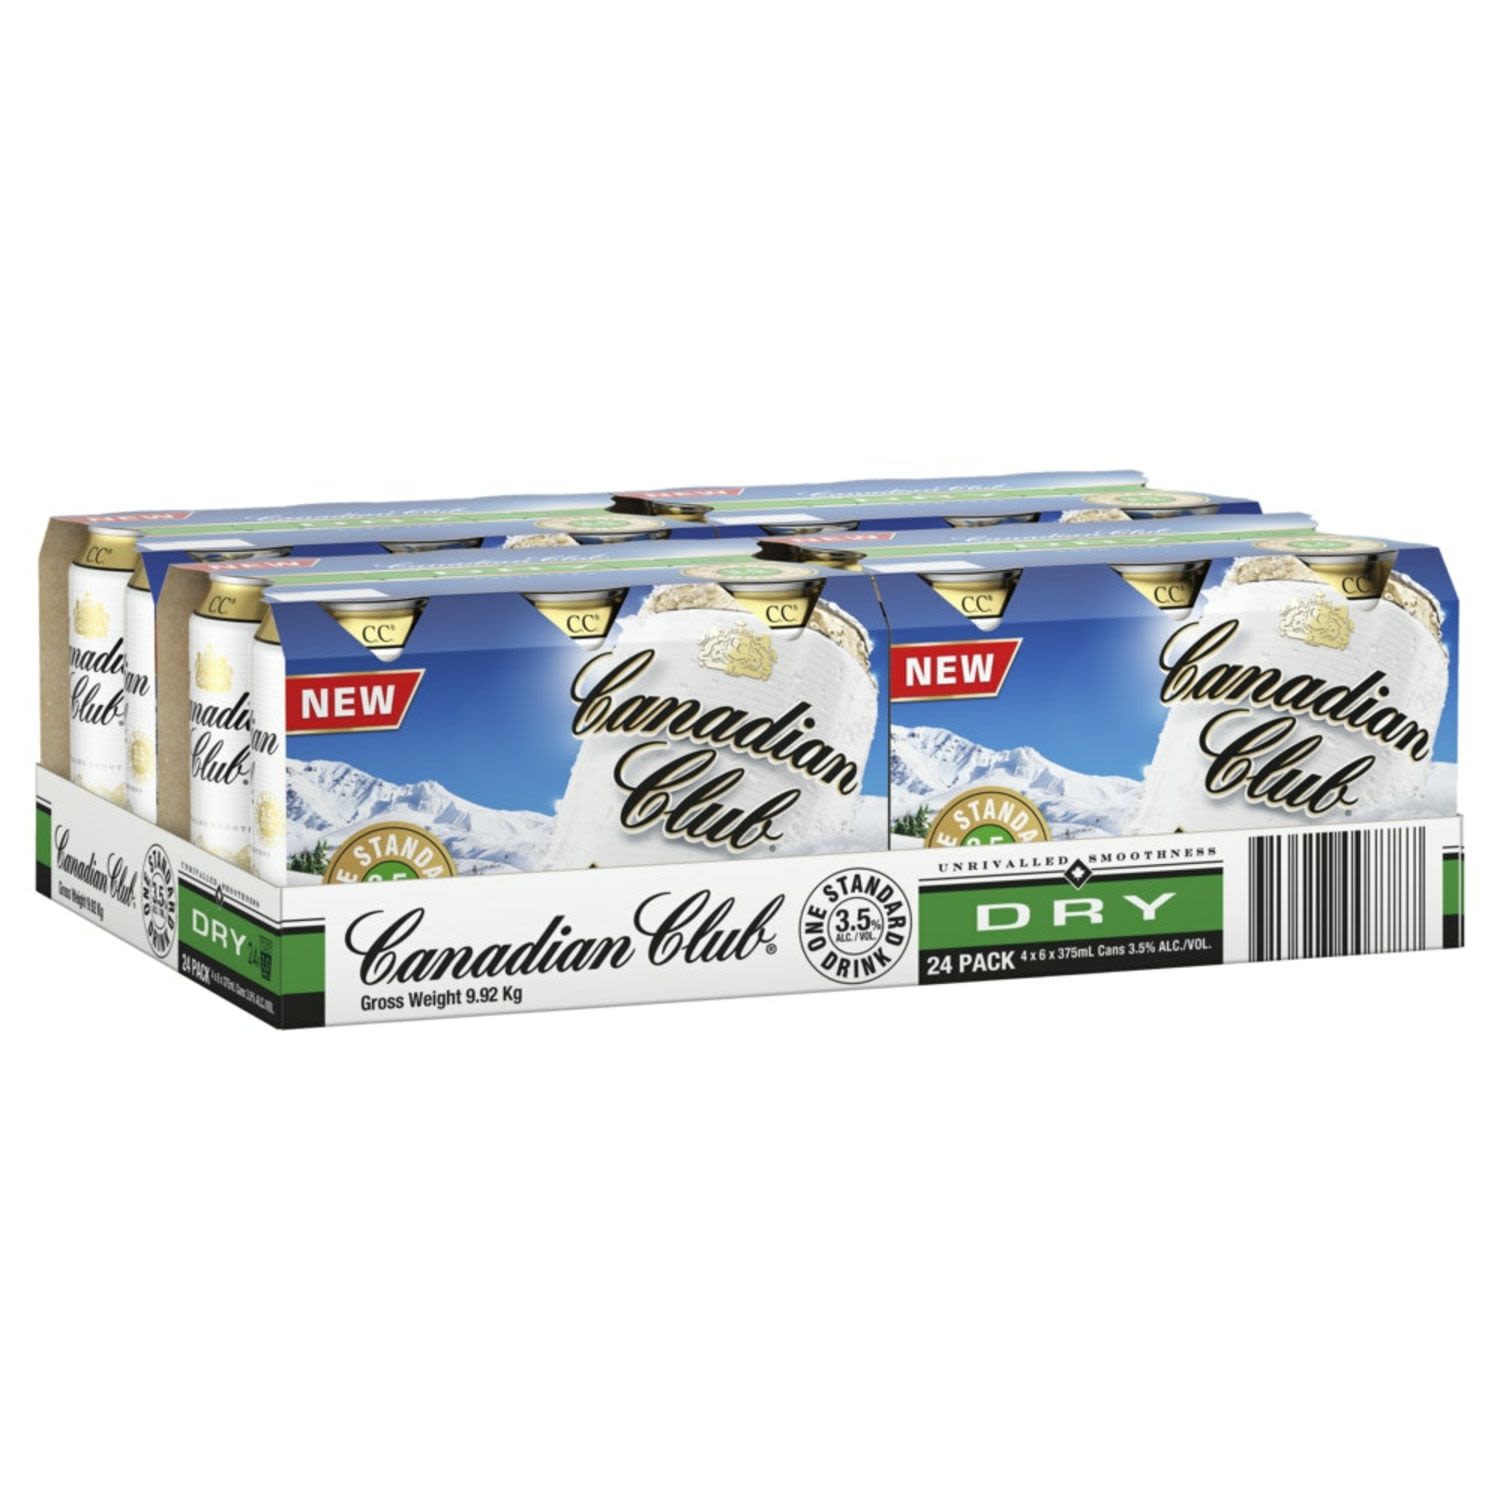 Canadian Club & Dry Mid Strength Can 375mL 24 Pack